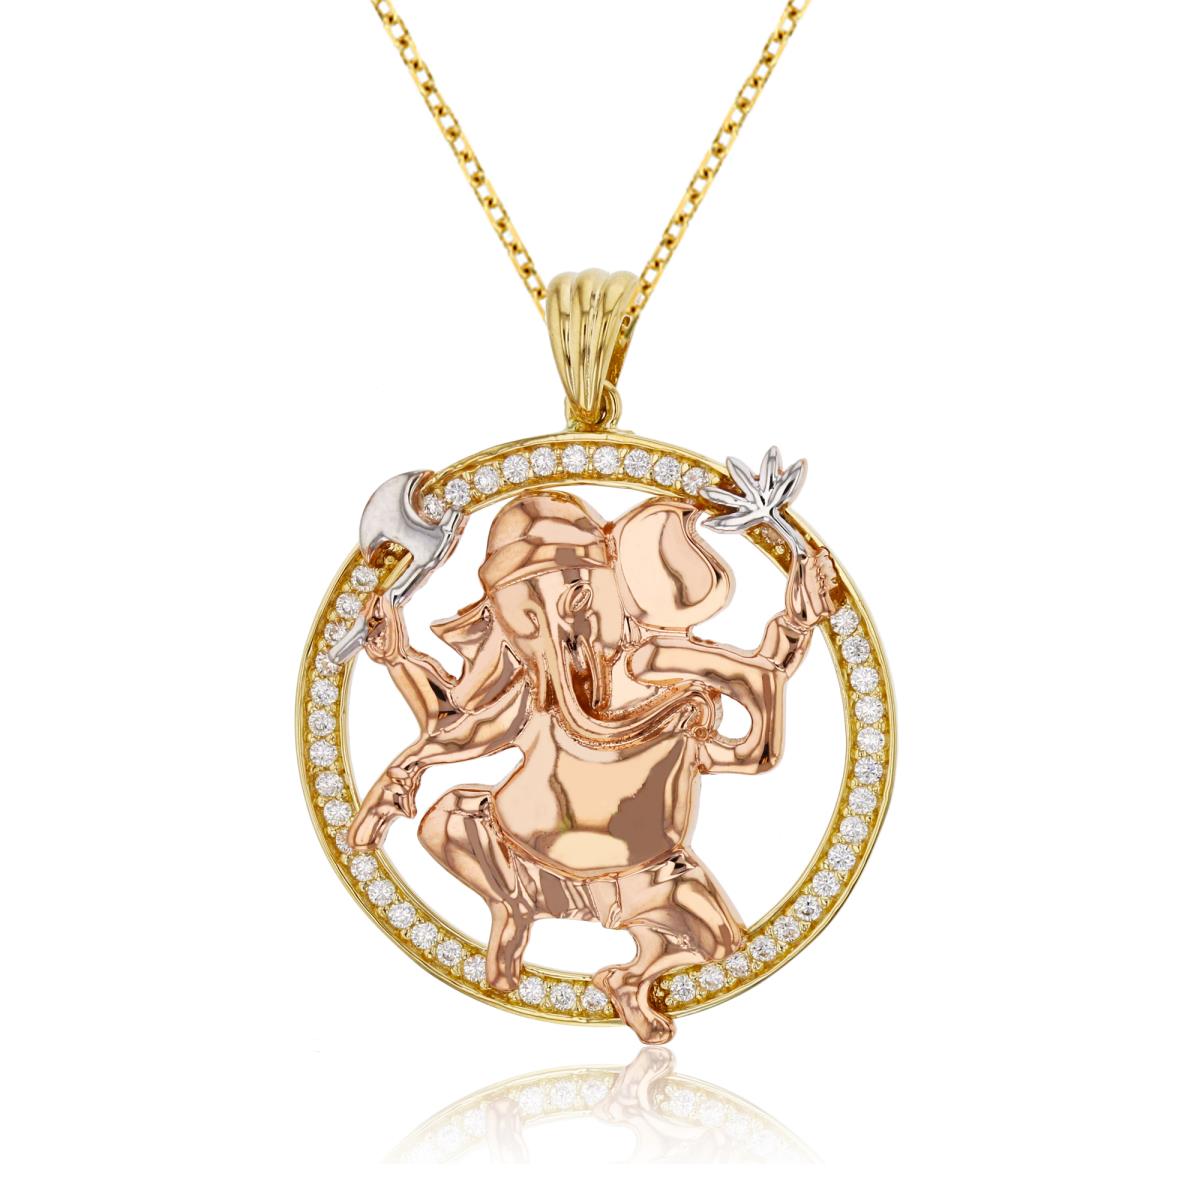 14K Gold Tricolor 34x29mm Indian Ganesha 24" Cable Chain Necklace